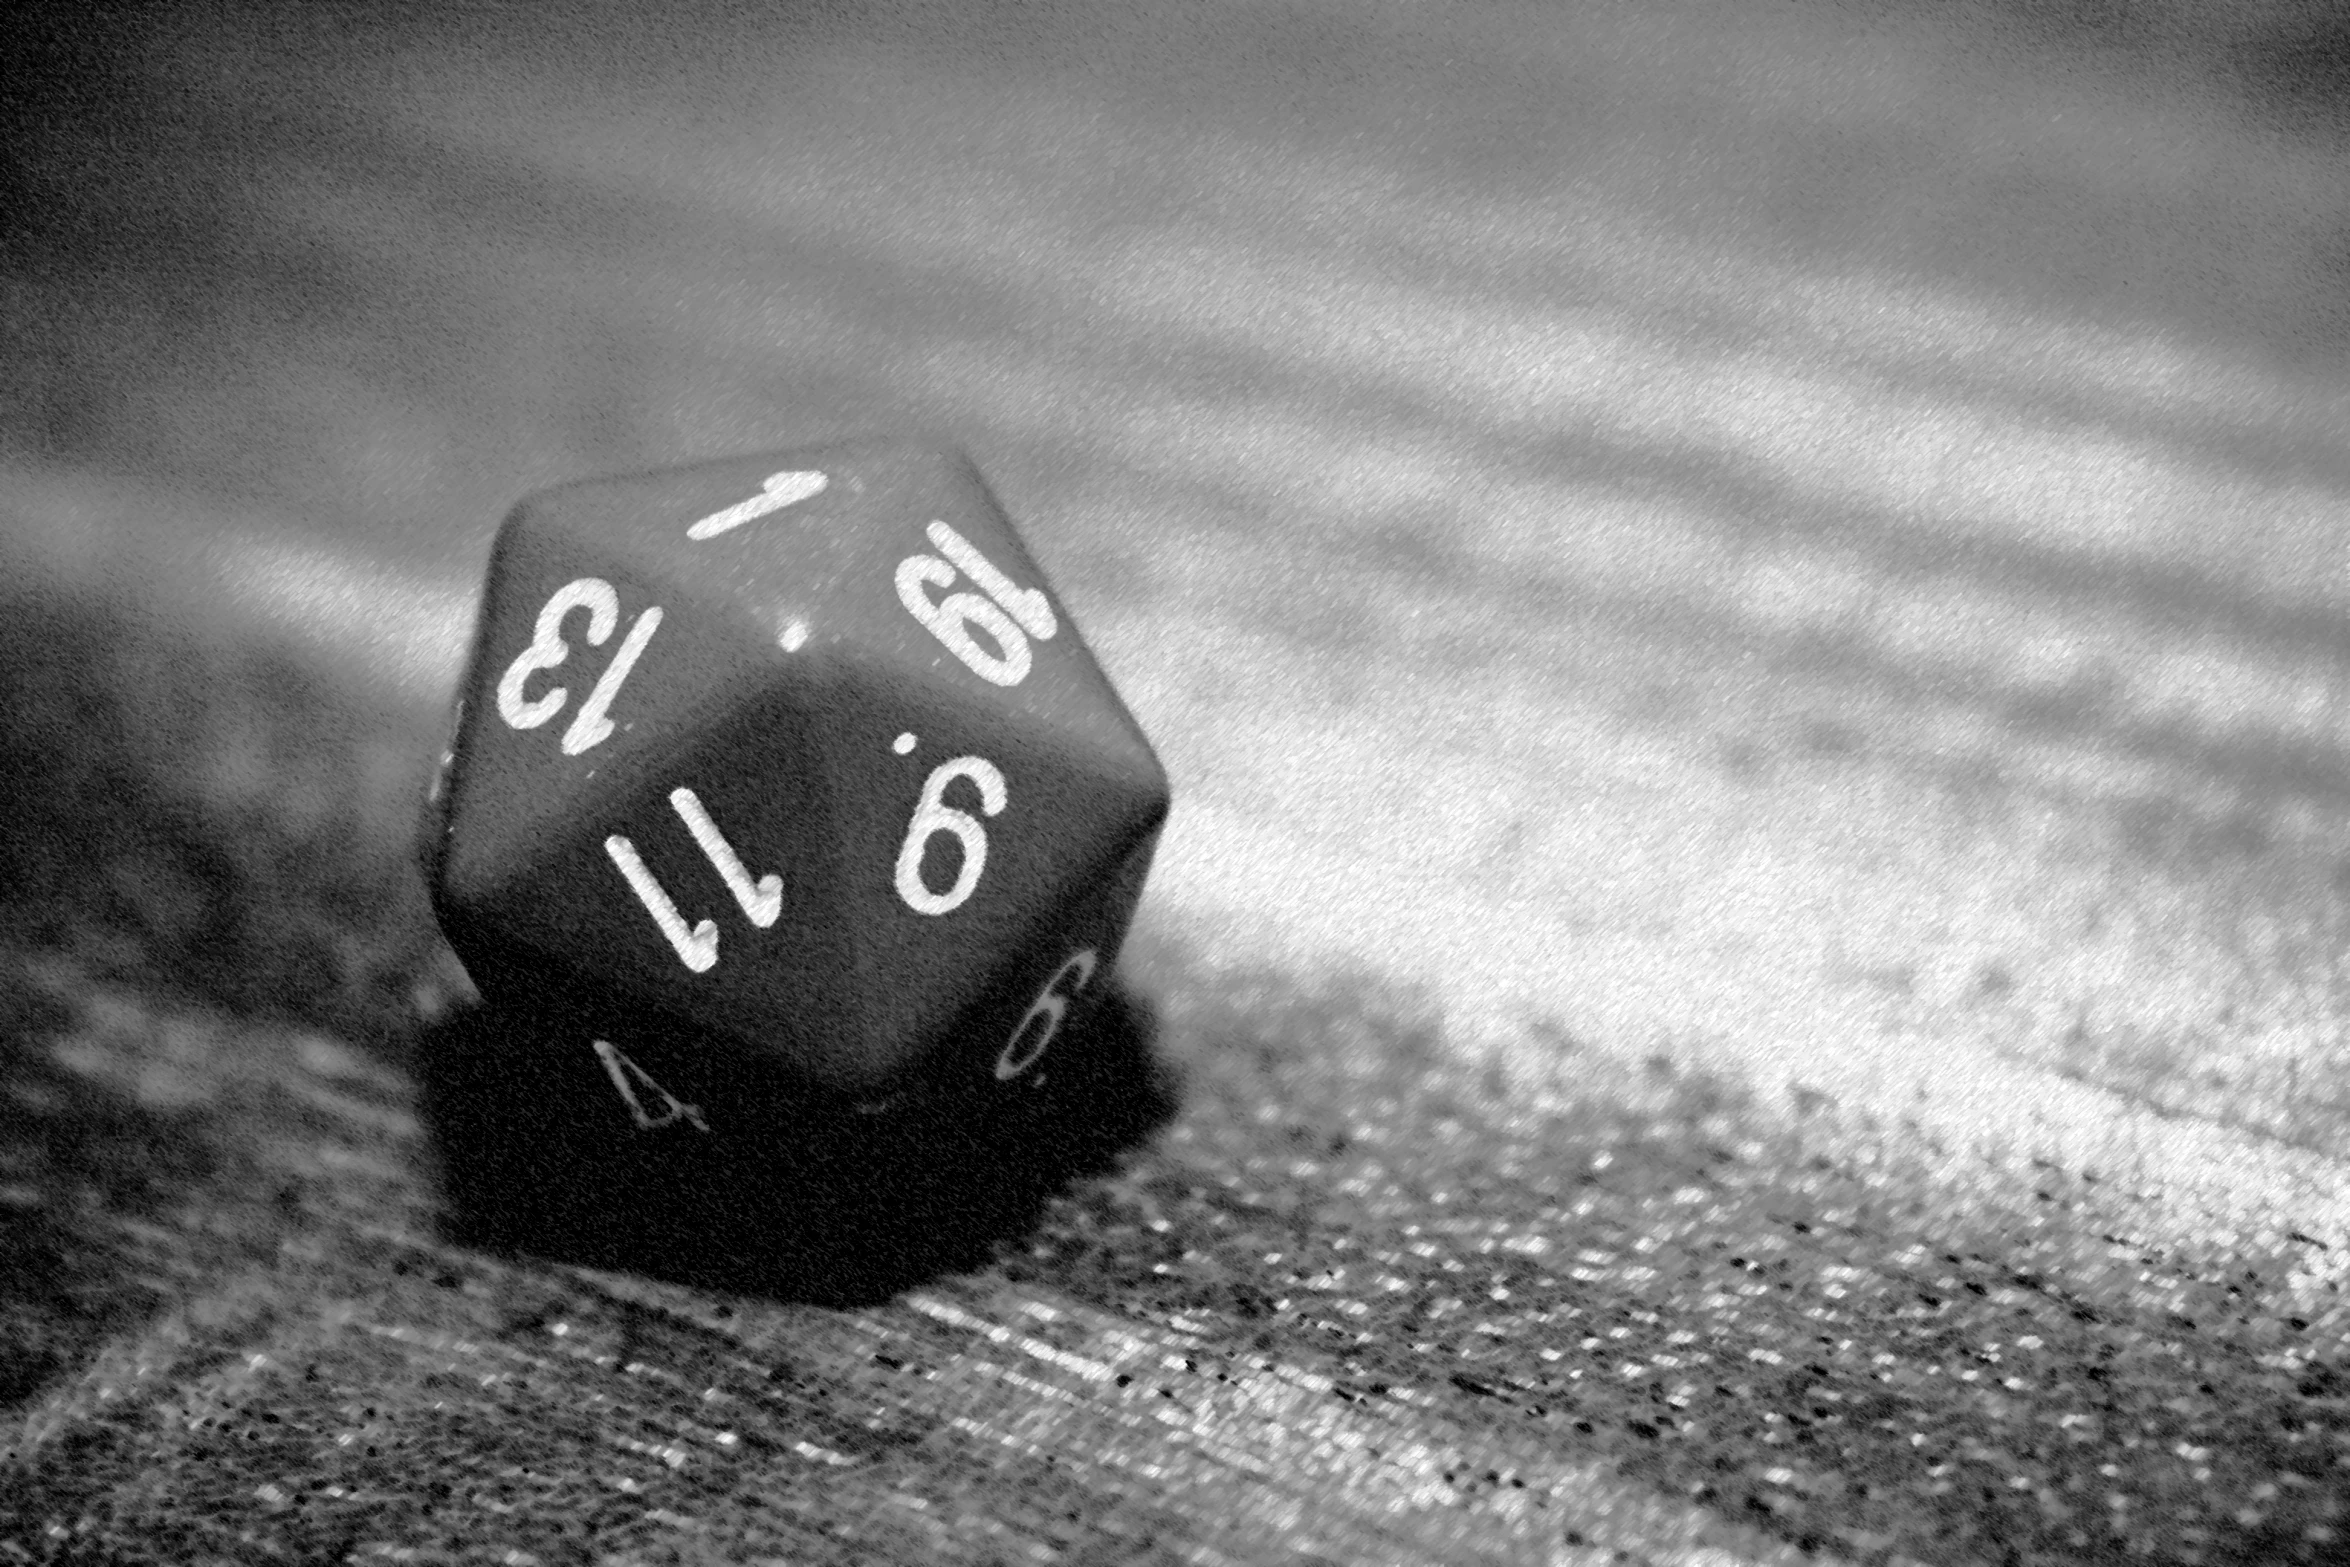 the black and white po shows the numbers on the black dice